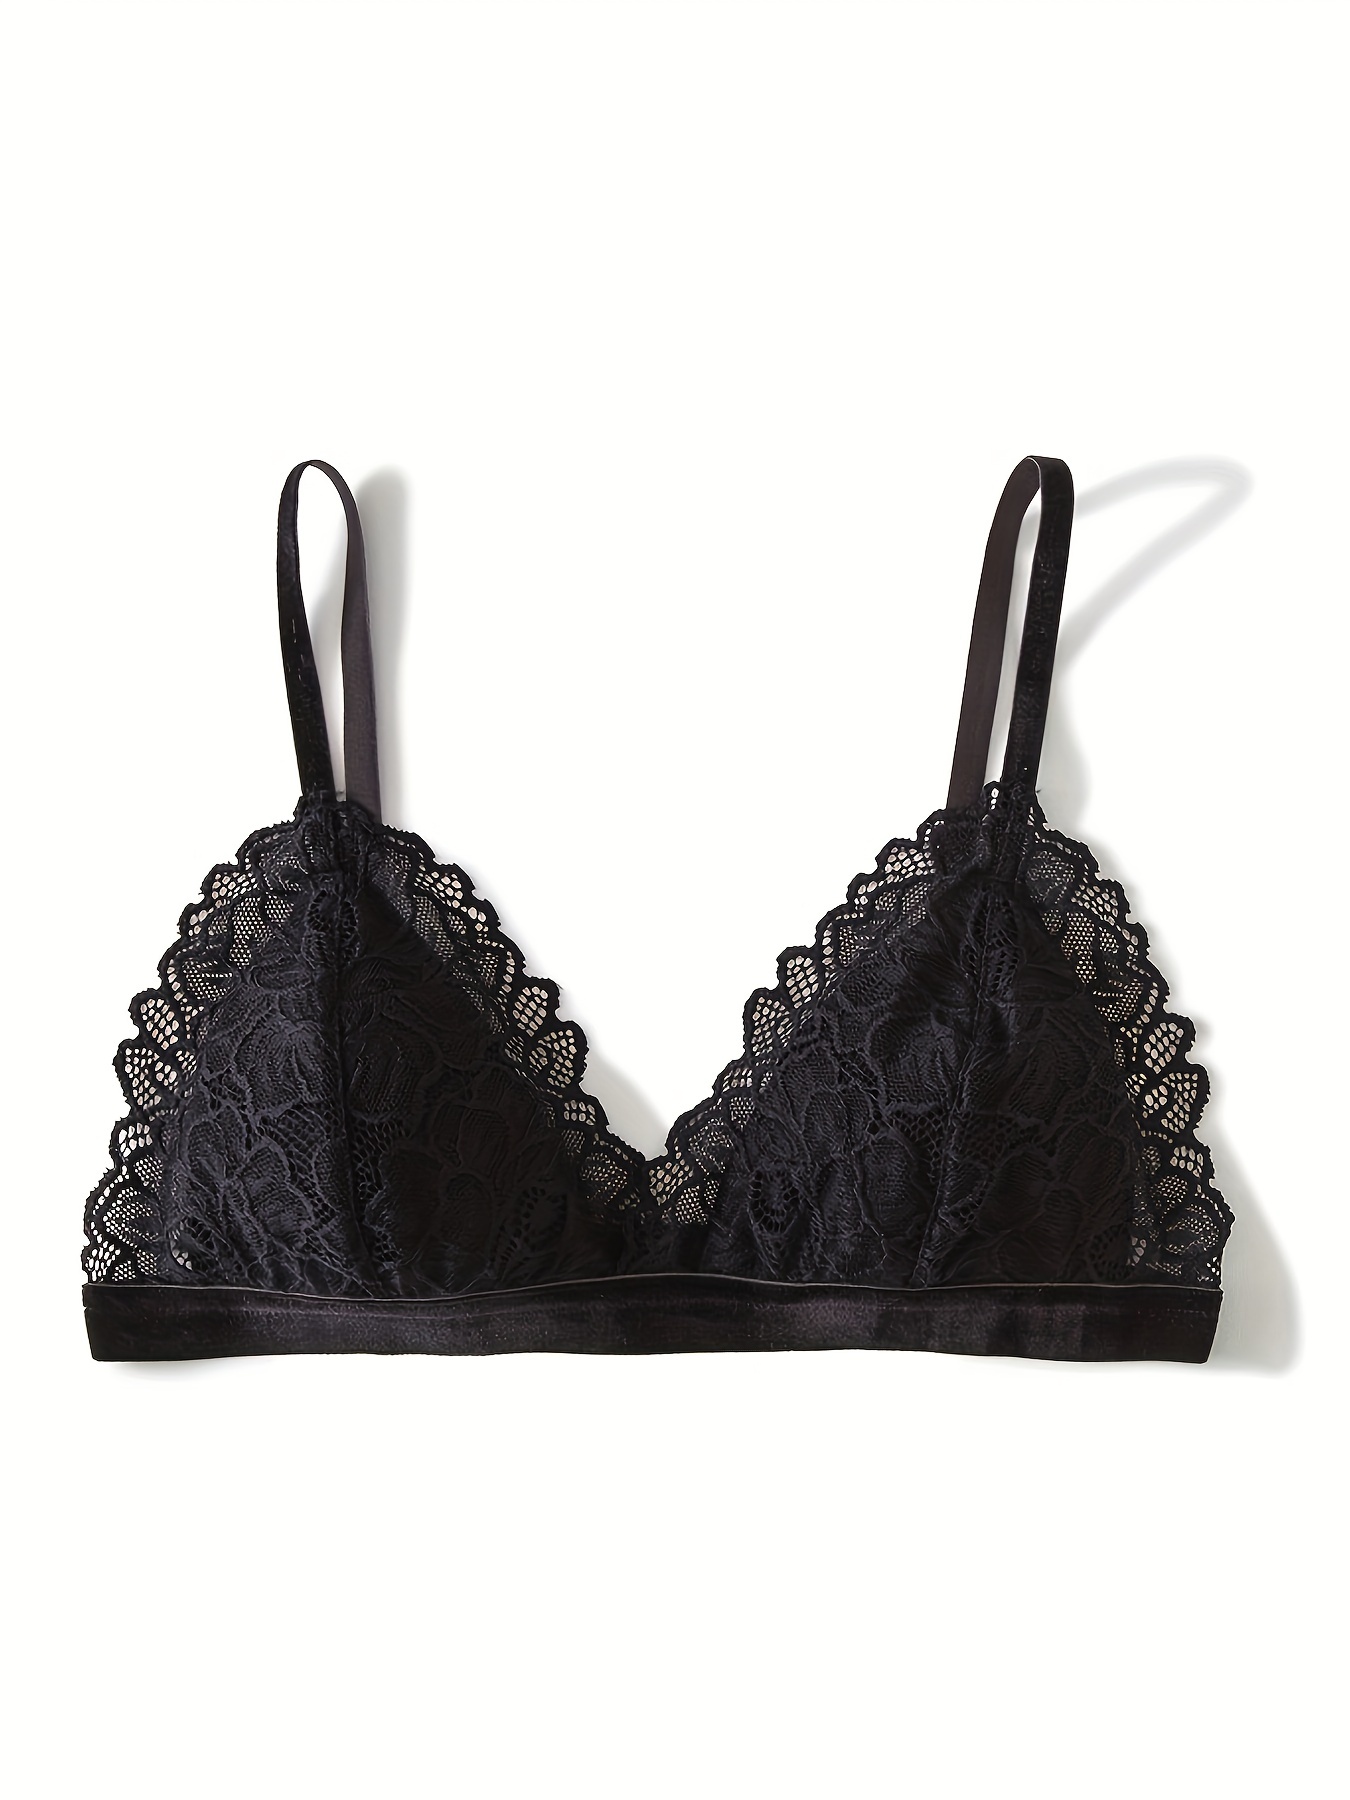 cup bottom too small? underwire too narrow? 12D - Bras N Things » French  Riviera (001770-02)